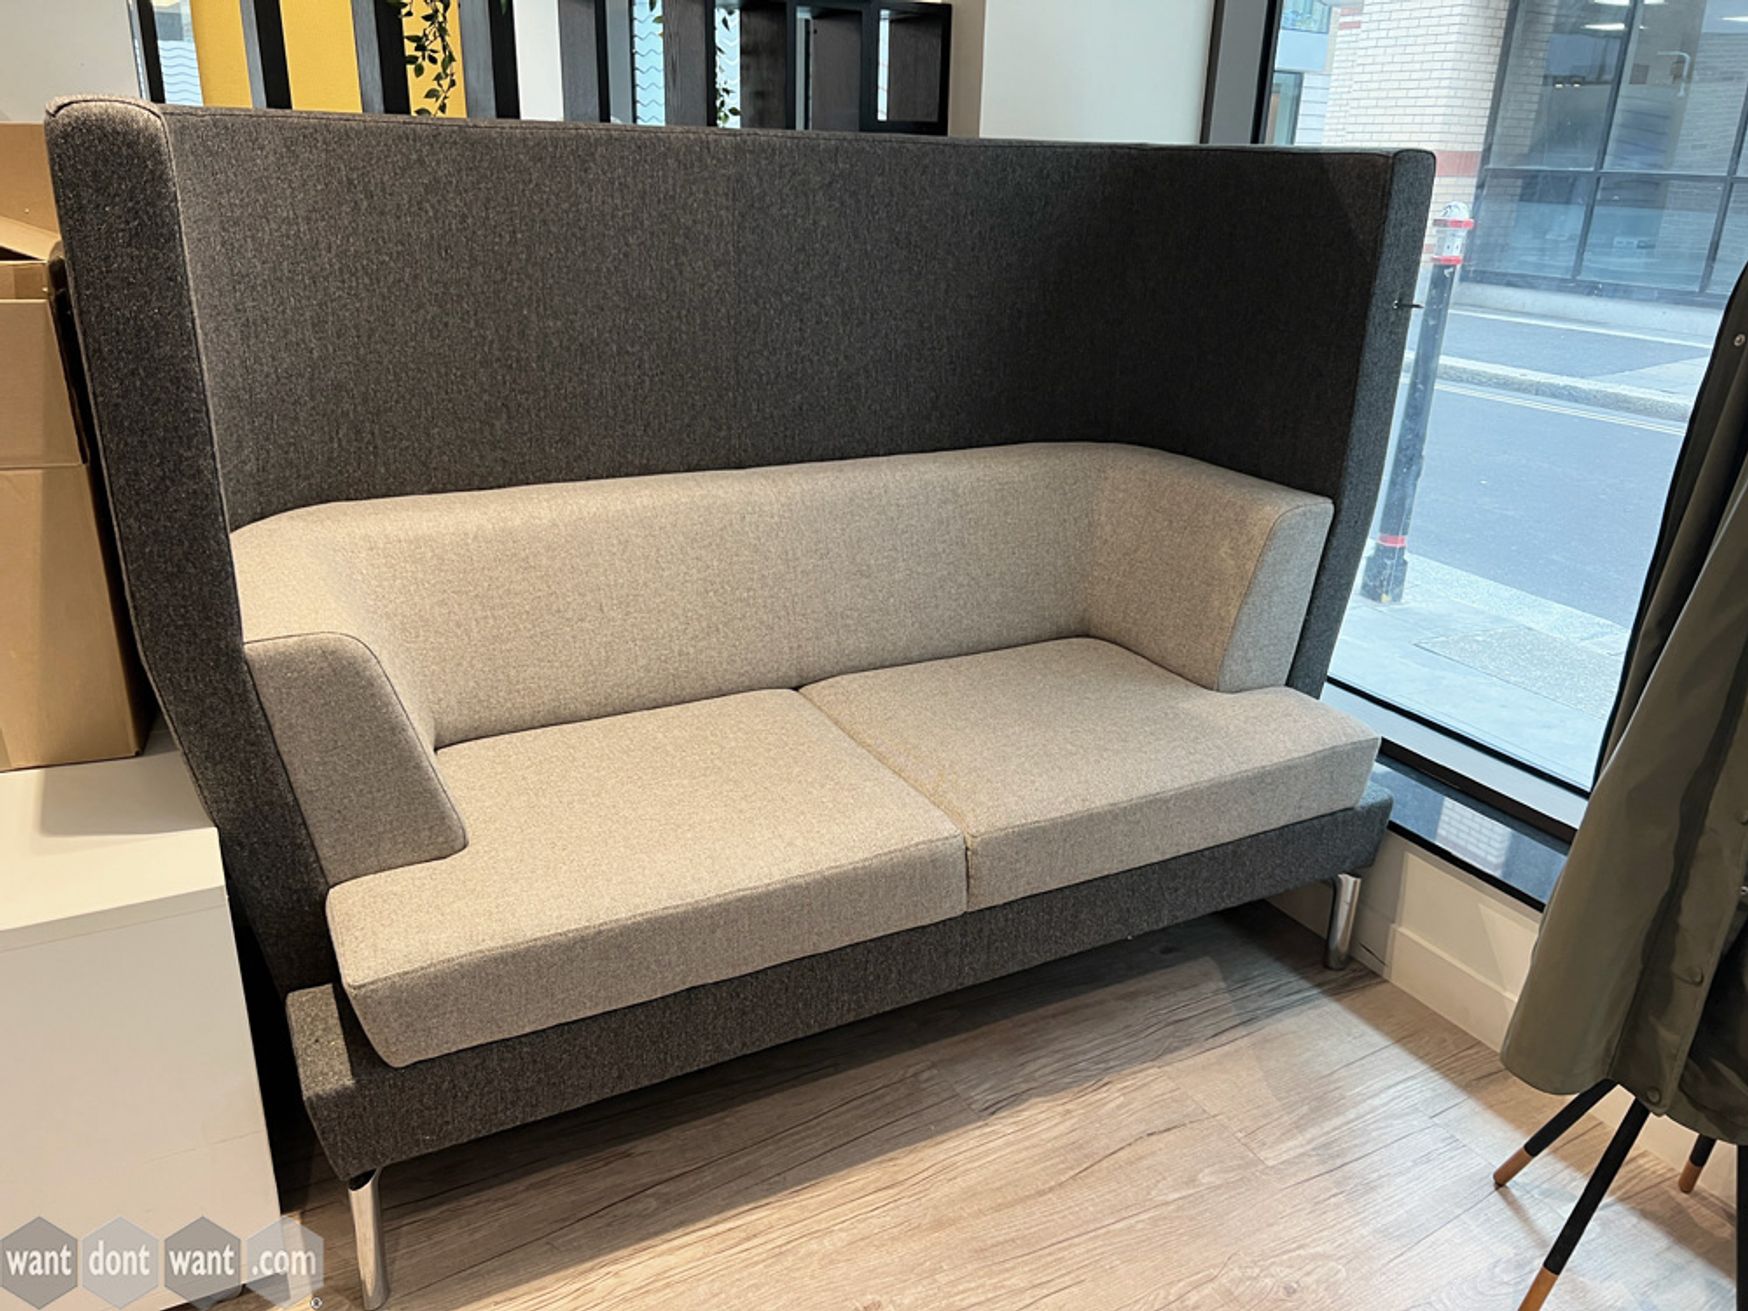 Used Boss Design 'Entente' collaborative meeting booth. Photo shows just one half. The unit being sold of comprises two sofas, a central table and linking screen. Priced for complete unit.